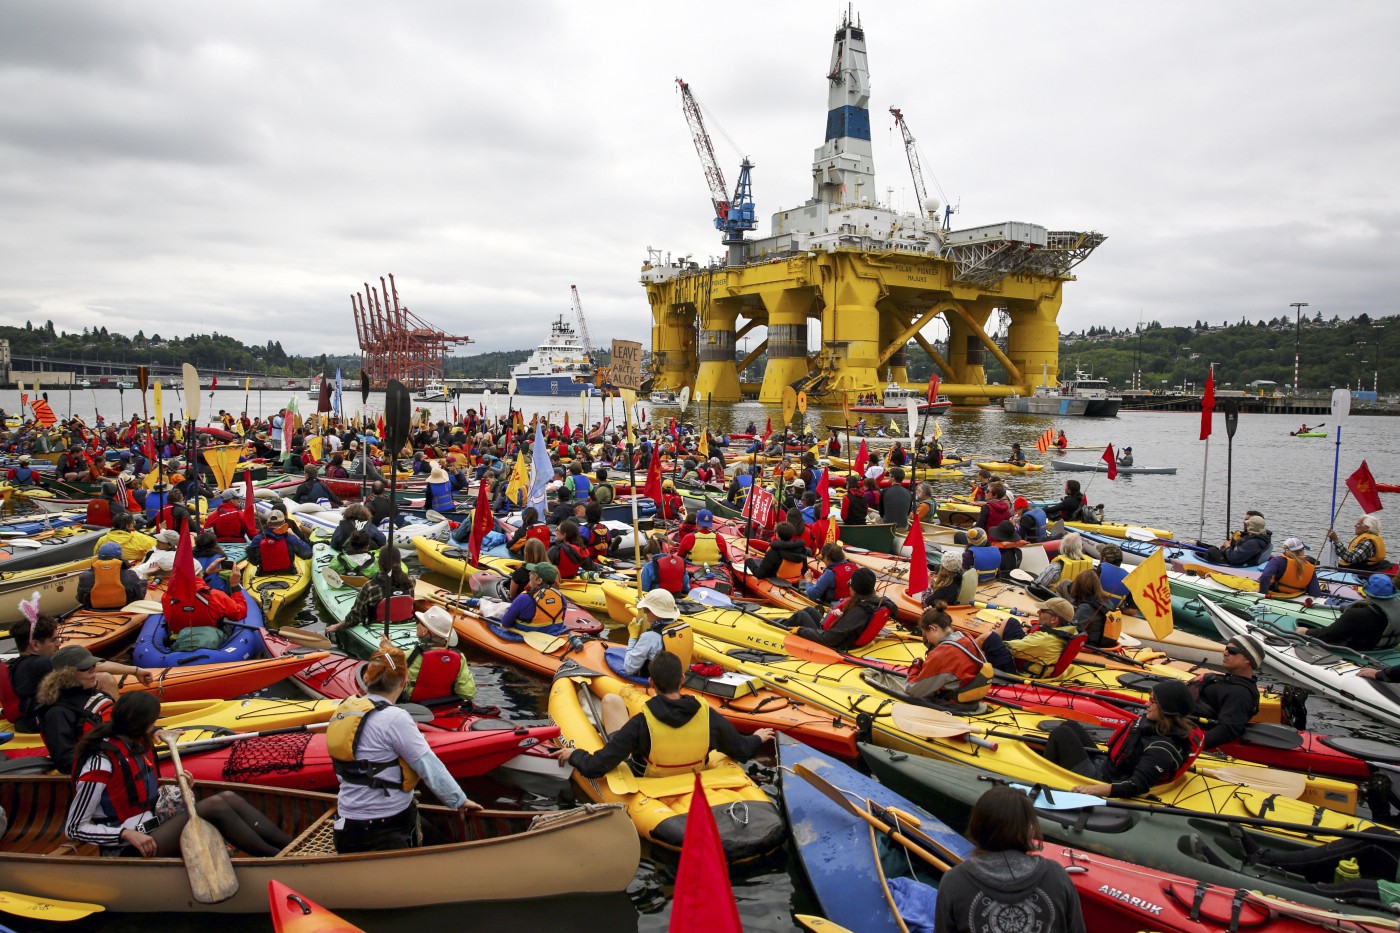 Activists who oppose Royal Dutch Shell’s plans to drill for oil in the Arctic Ocean prepare their kayaks for the “Paddle in Seattle” protest on Saturday, May 16, 2015, in Seattle.